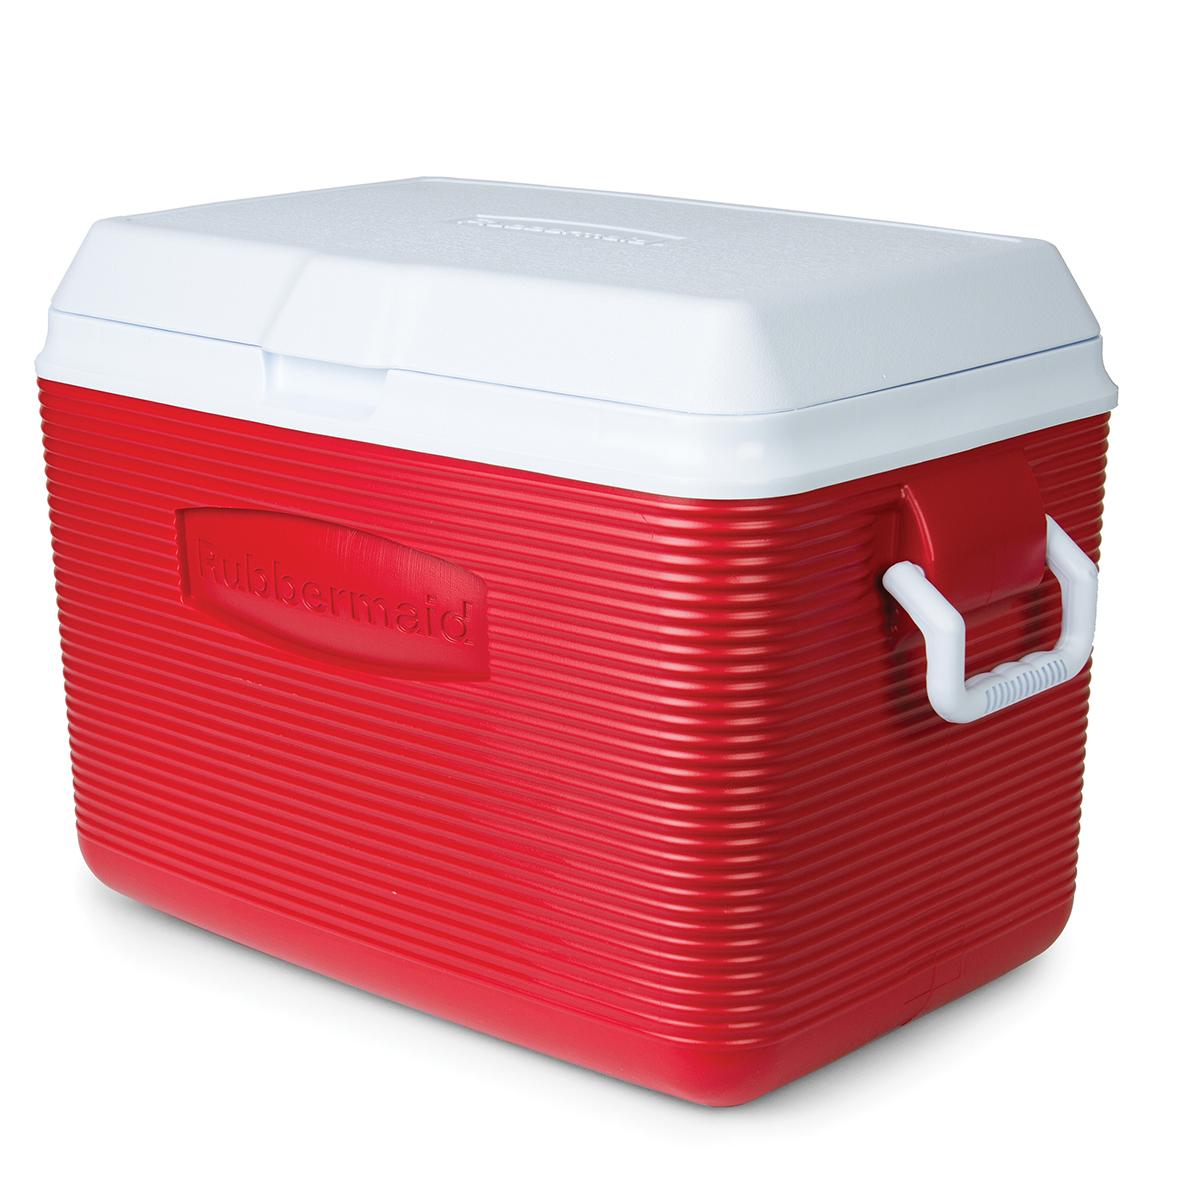 Rubbermaid Victory 48Q Cooler for $16.88